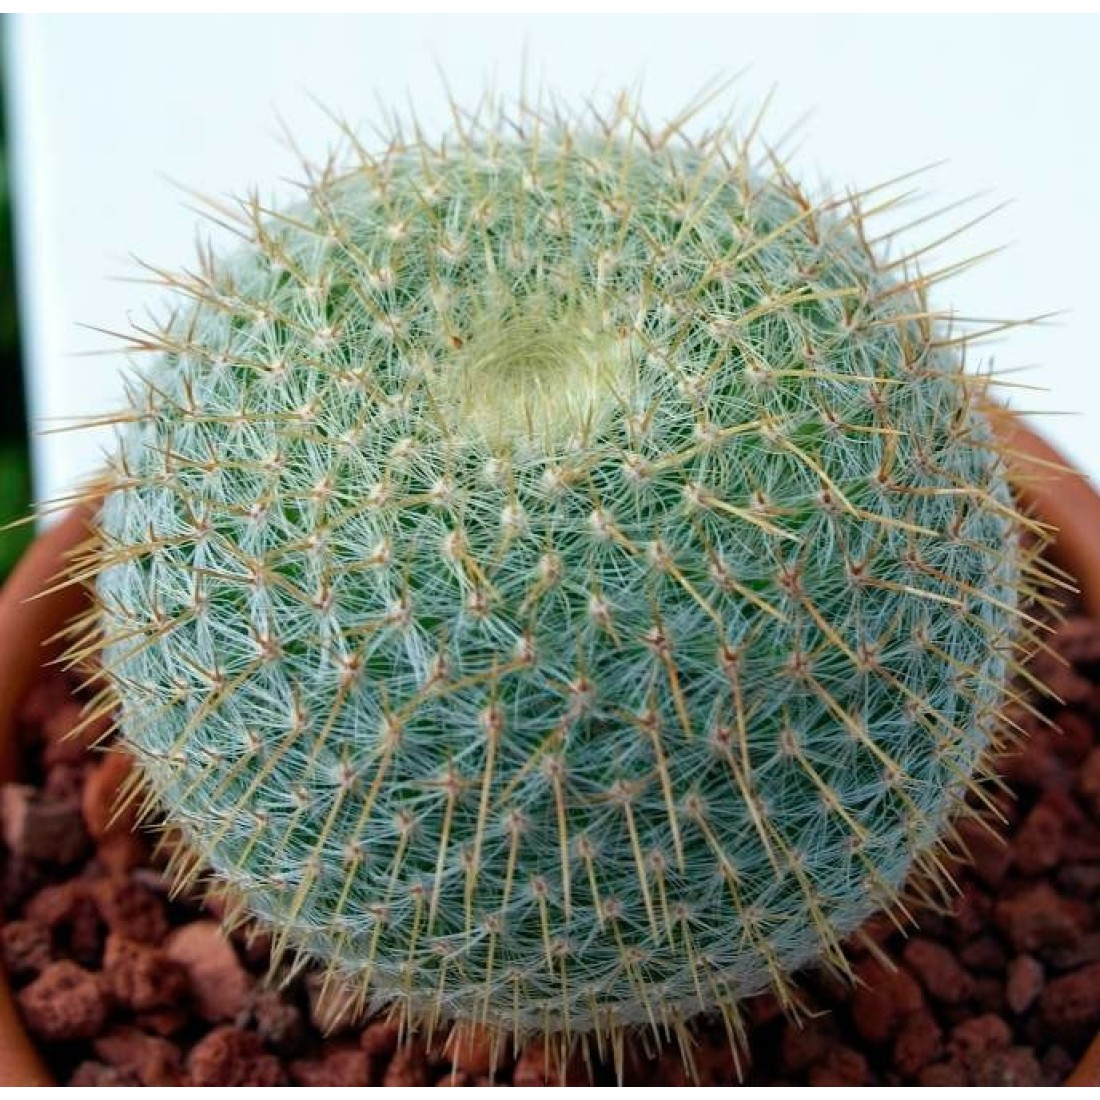 Mammillaria CELSIANA(PINCUSHION) cactus live plant ( size 3 inches) flowering size 1